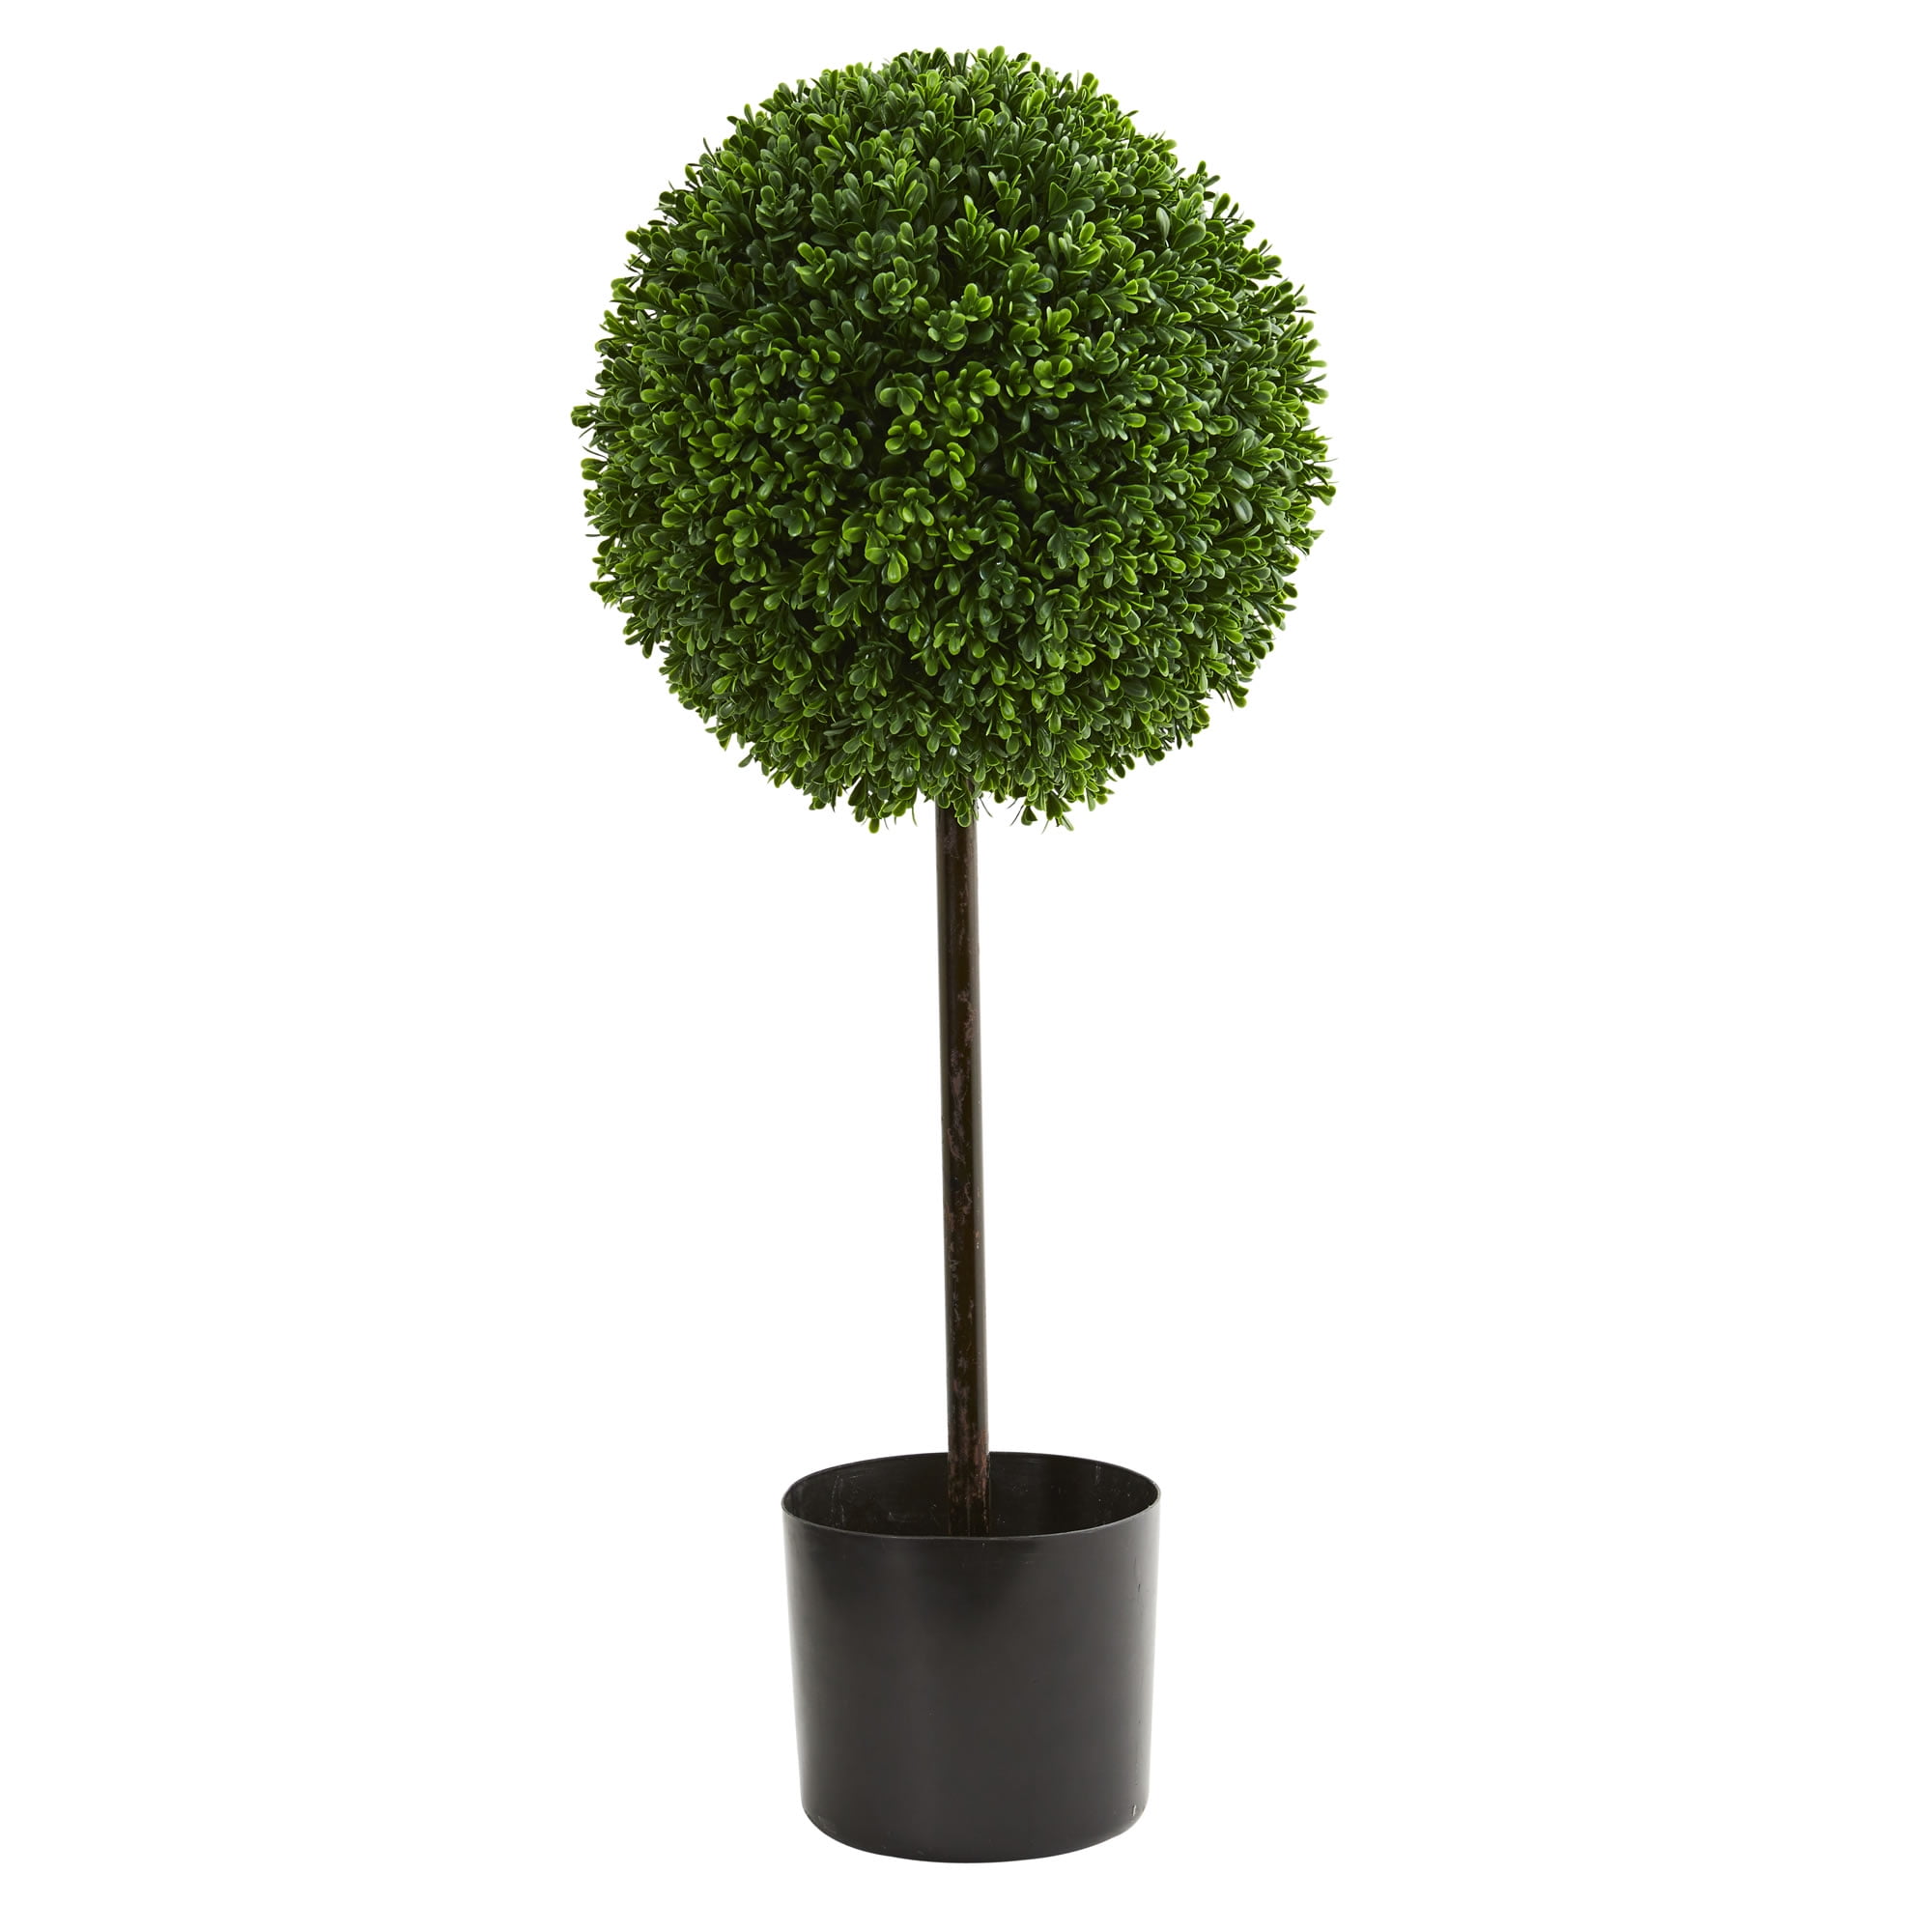 36" ARTIFICIAL WIDE BOXWOOD OUTDOOR TOPIARY TREE PLANT UV SPIRAL 3' POOL PORCH 